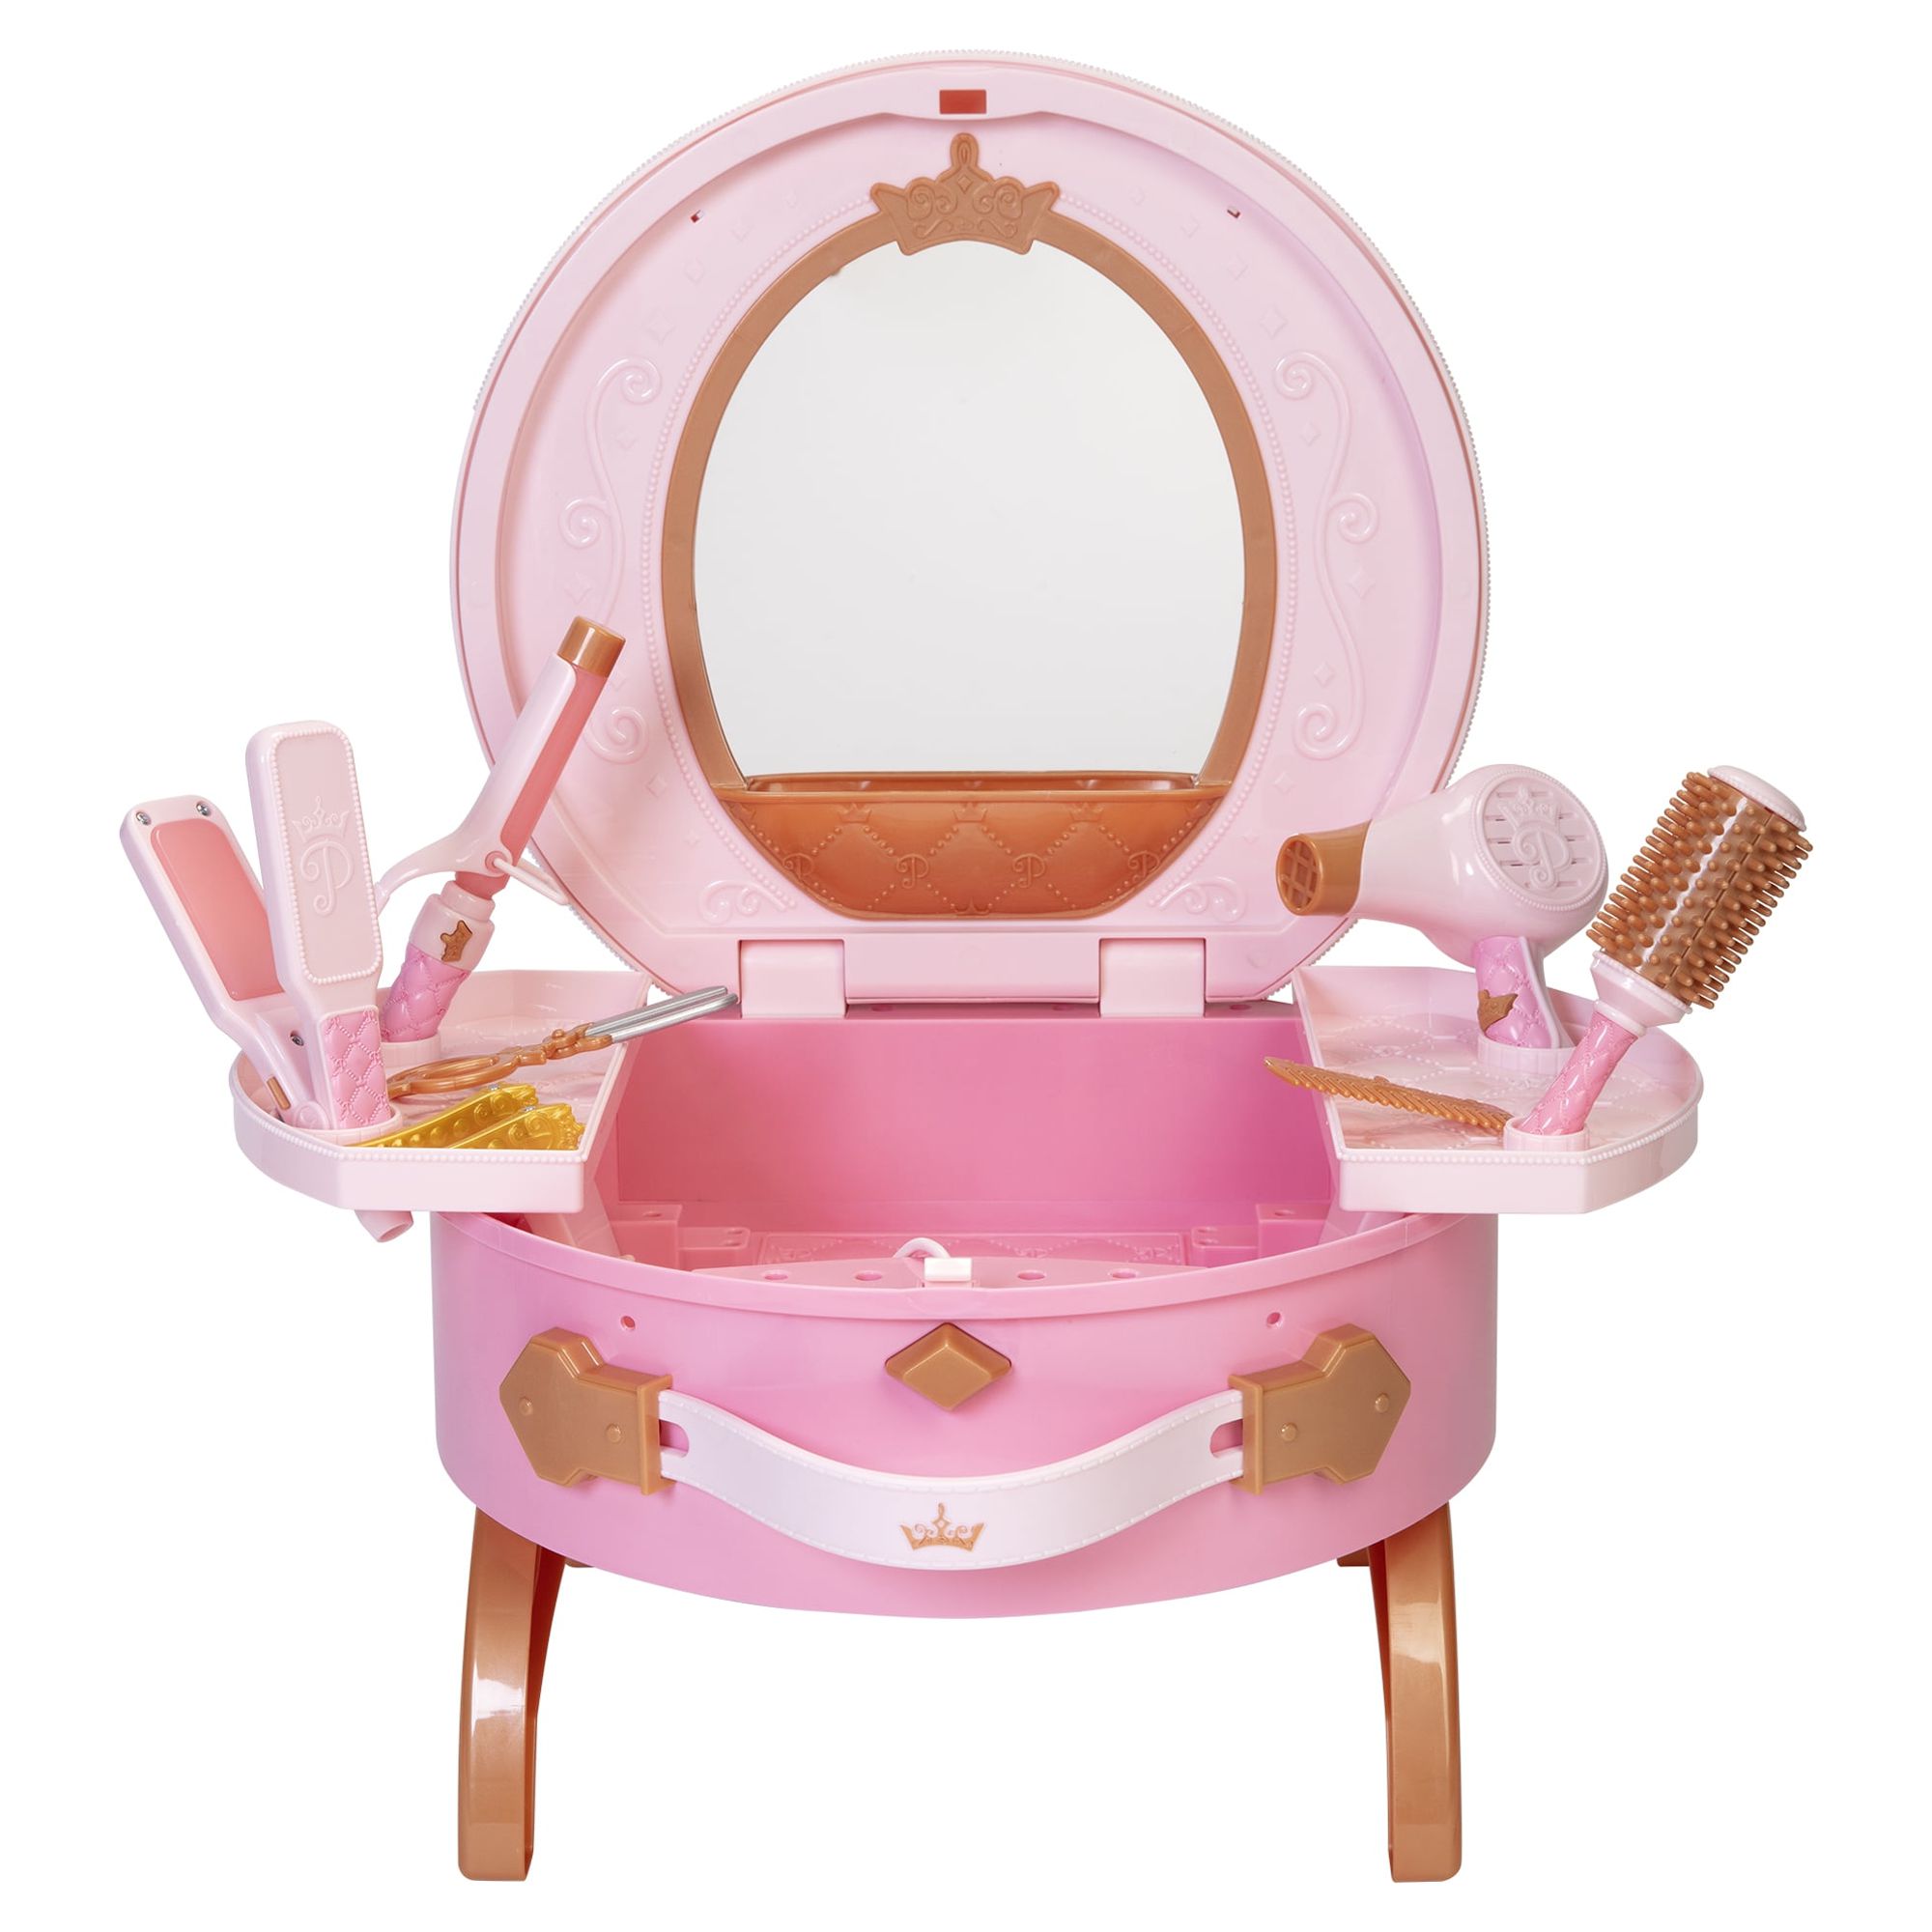 Disney Princess Style Collection Light Up and Style Vanity - image 1 of 16